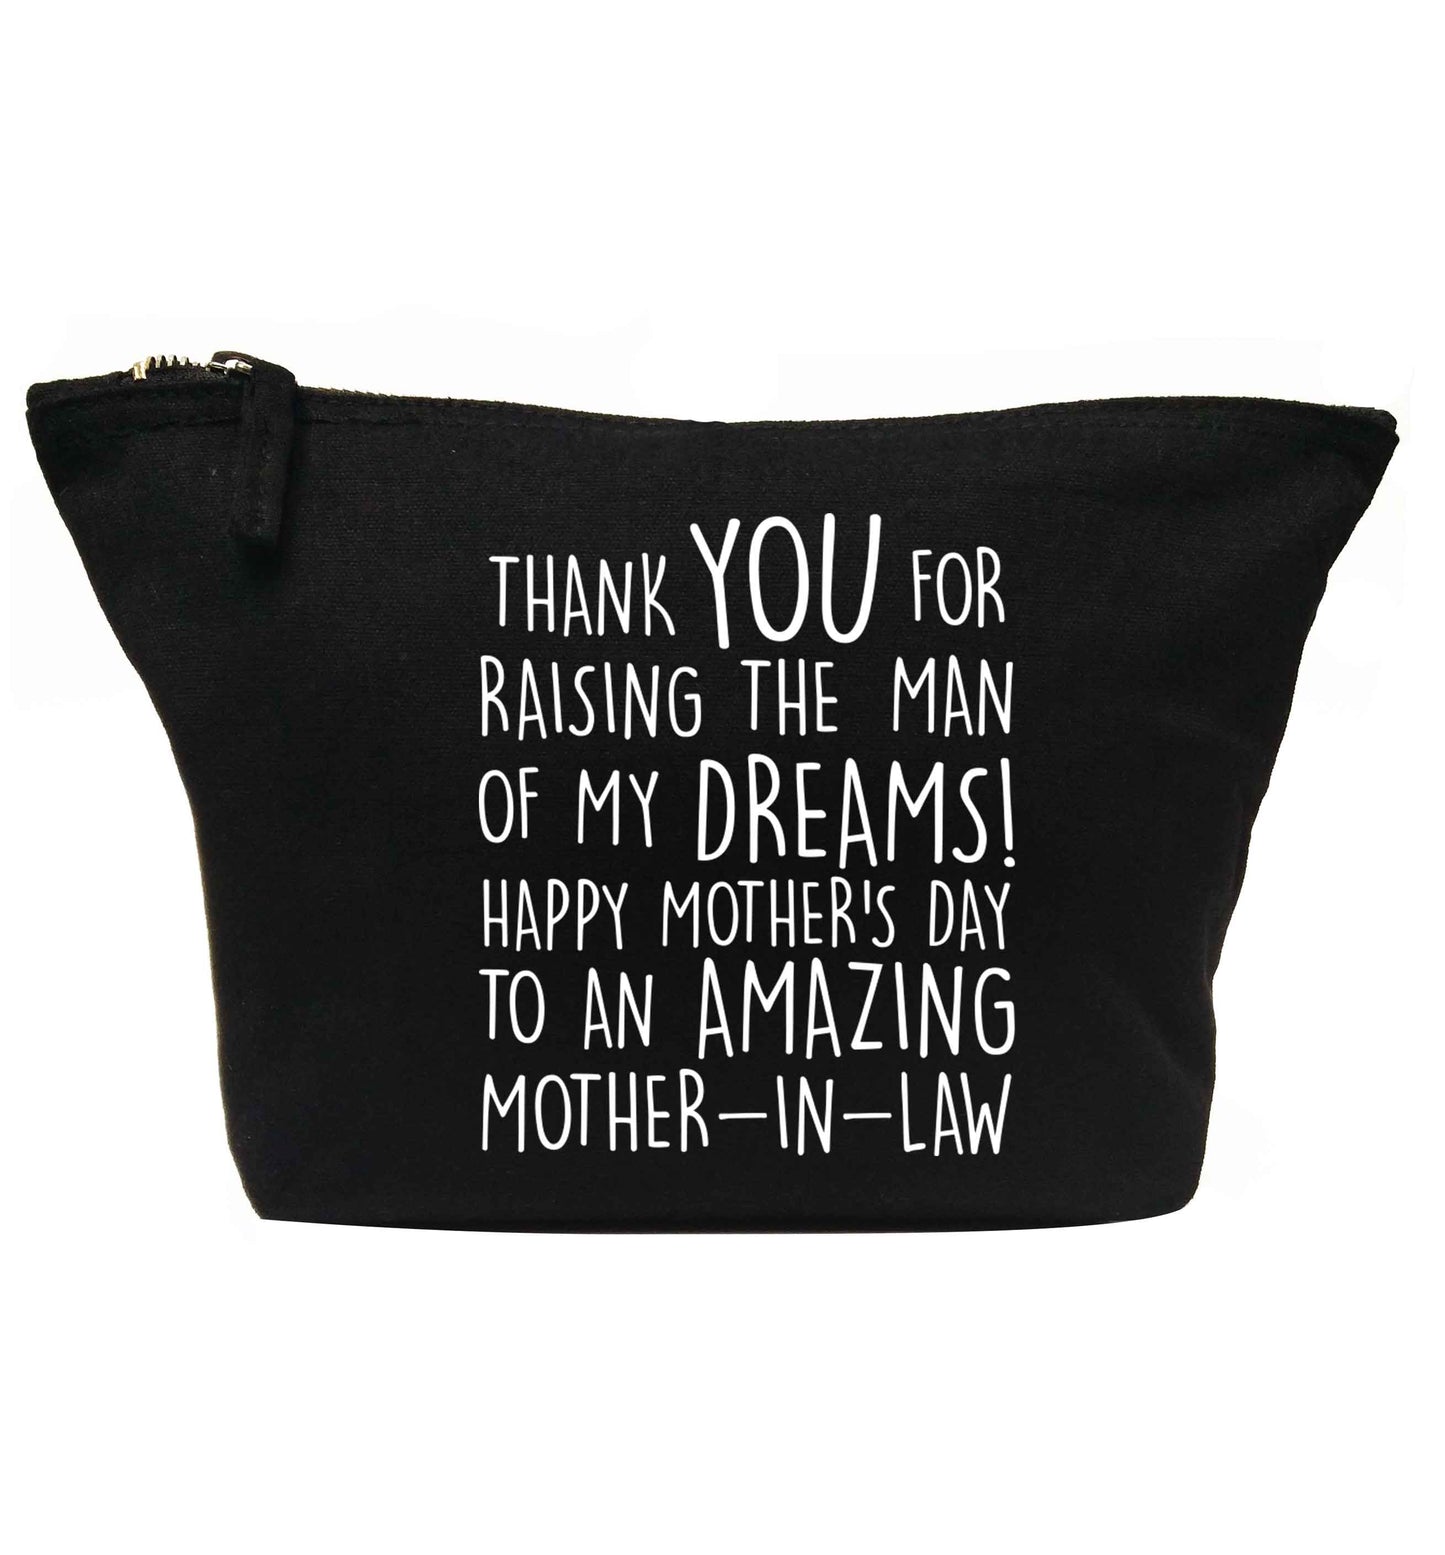 Raising the man of my dreams mother's day mother-in-law | Makeup / wash bag